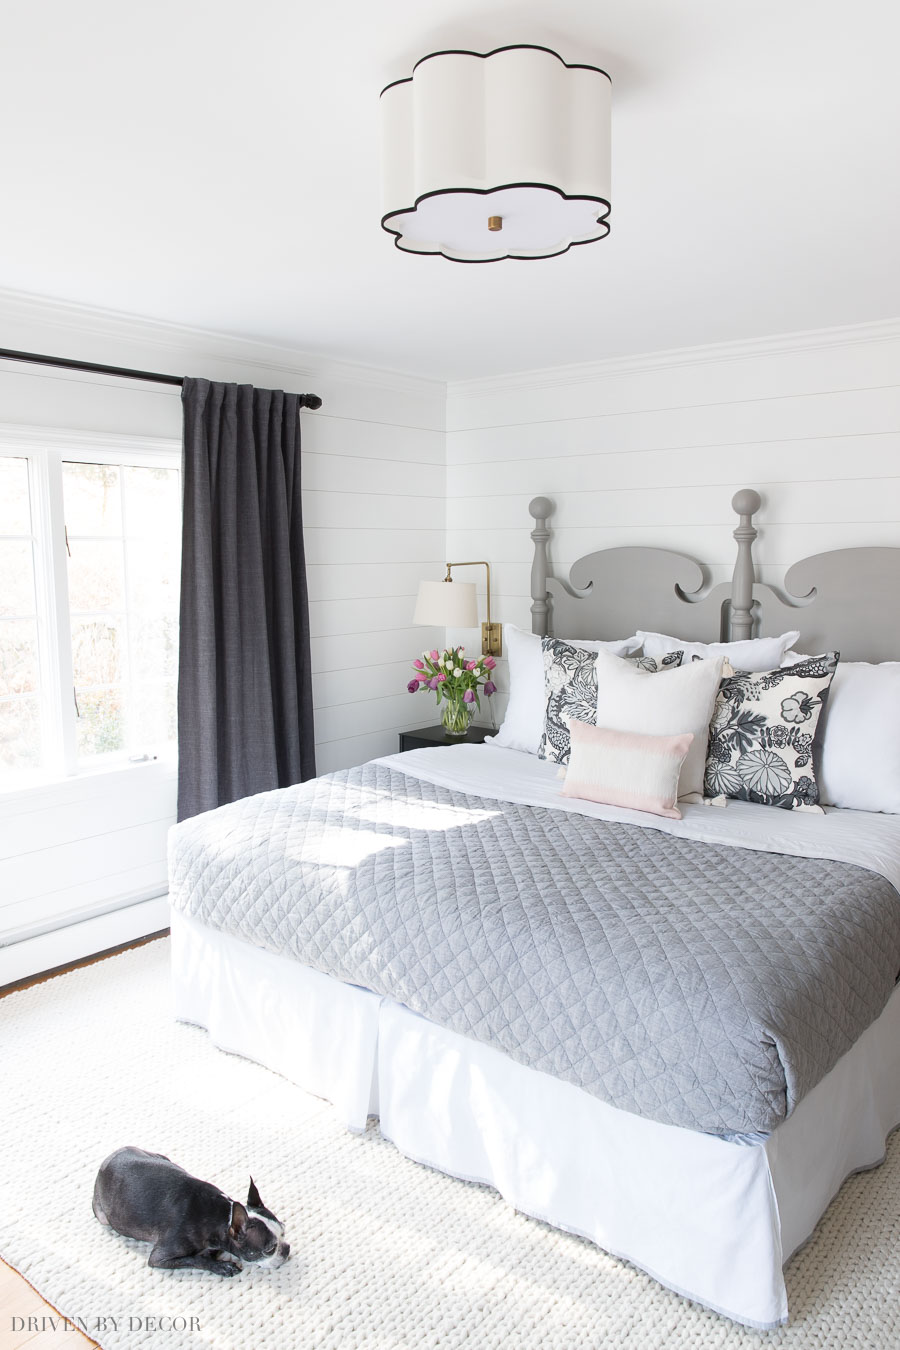 Great ideas for organizing and decorating your bedroom for spring!